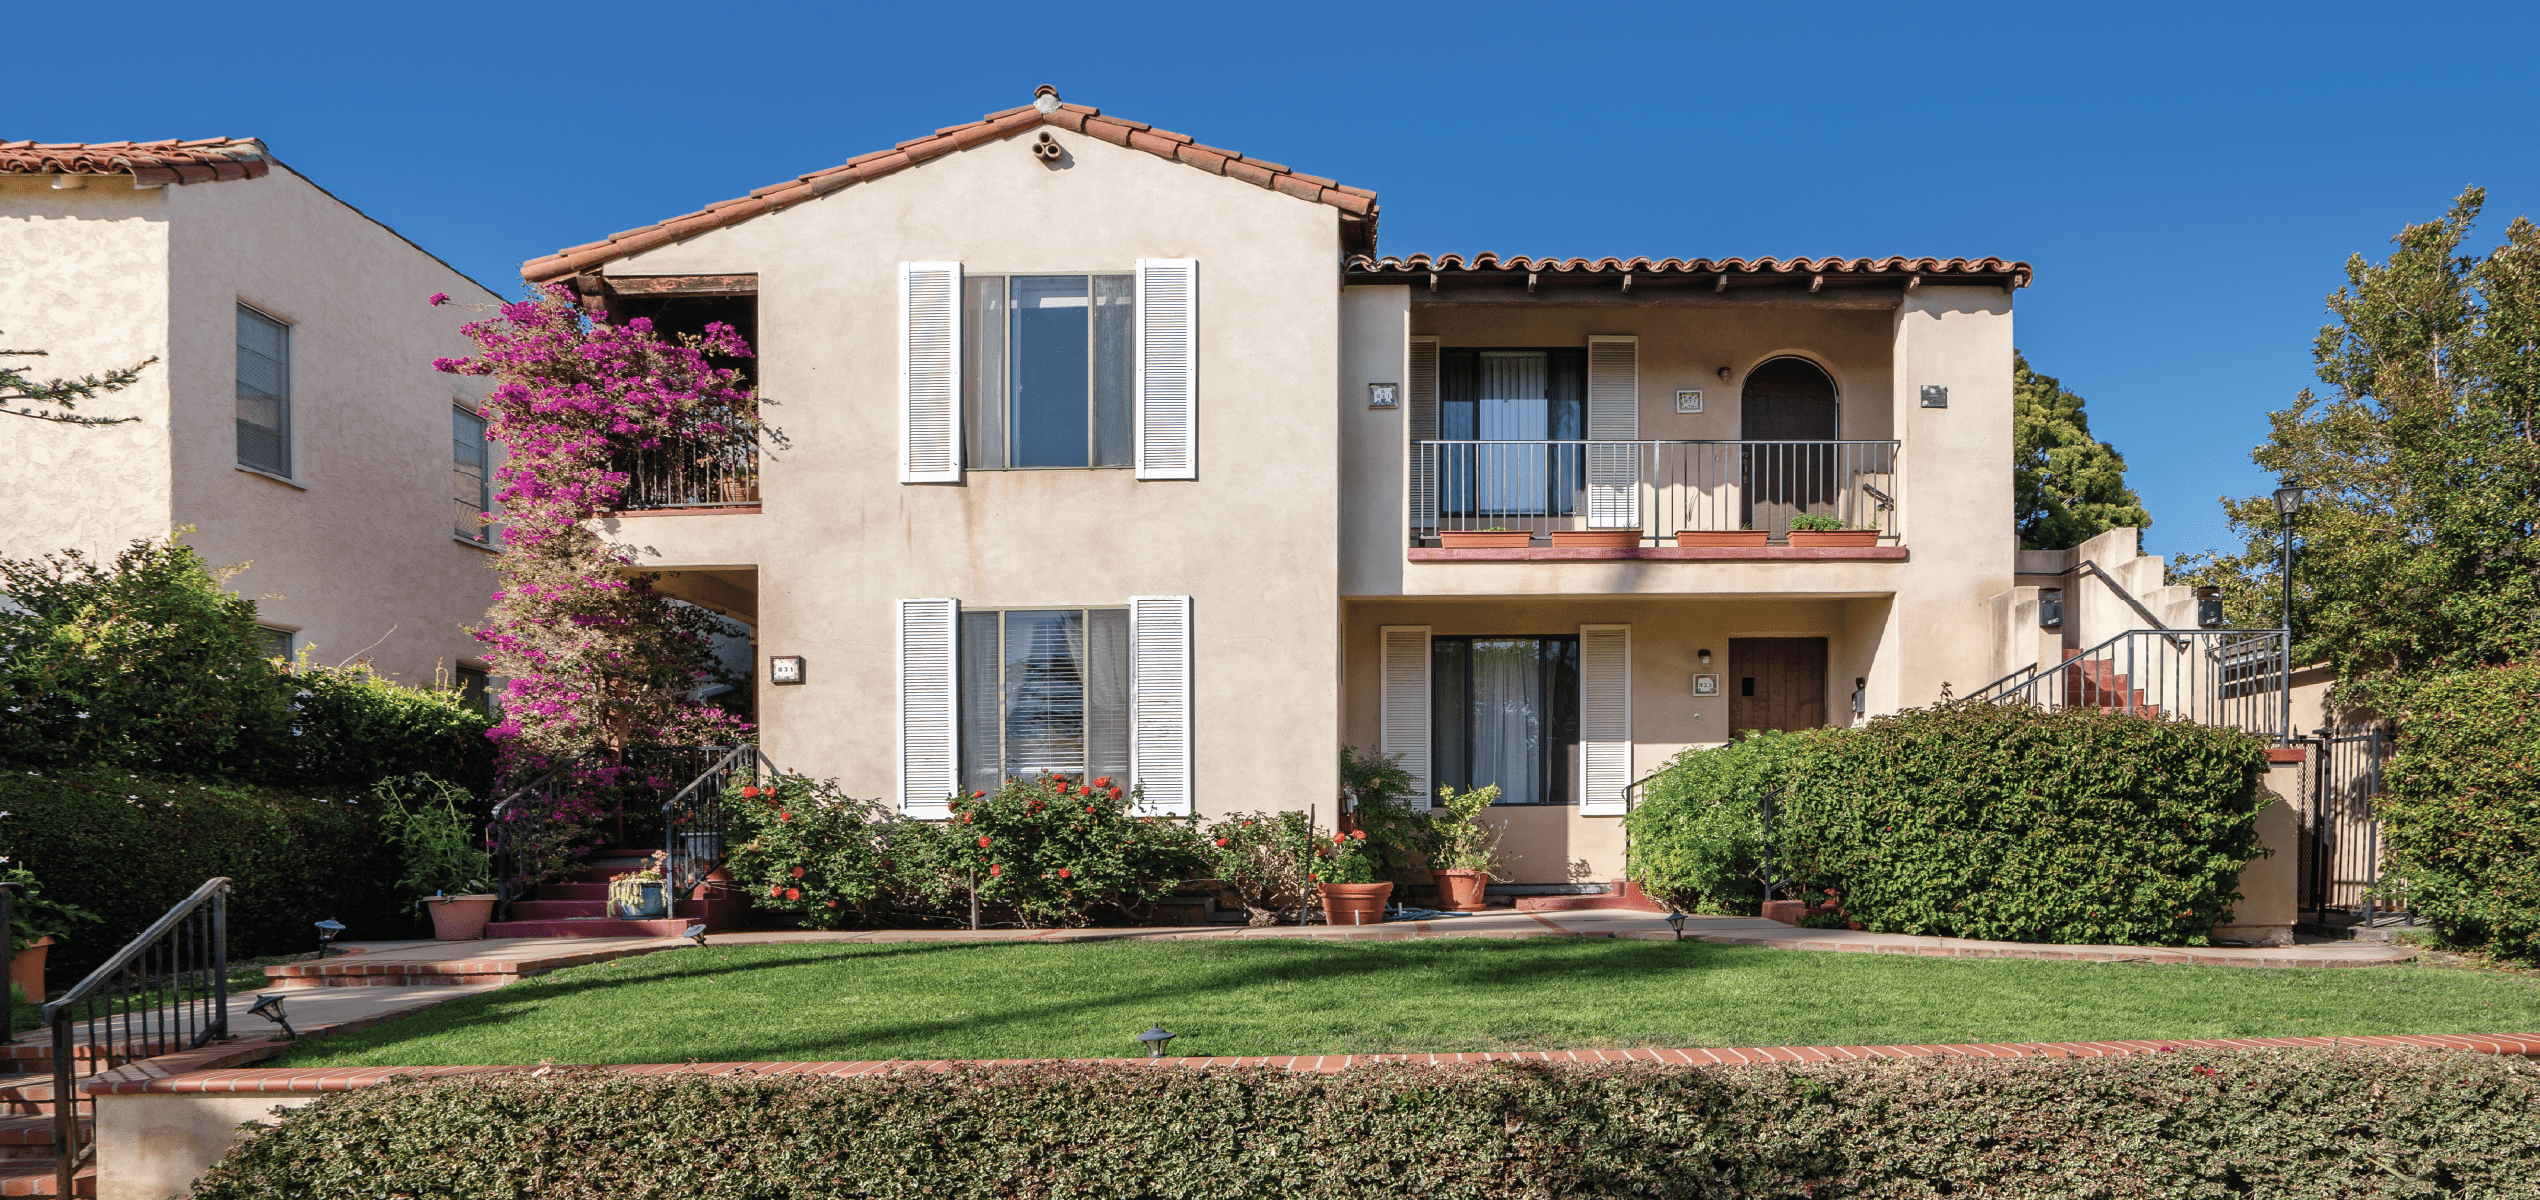 Exterior or 831 12th, a spanish-style multifamily property in Santa Monica